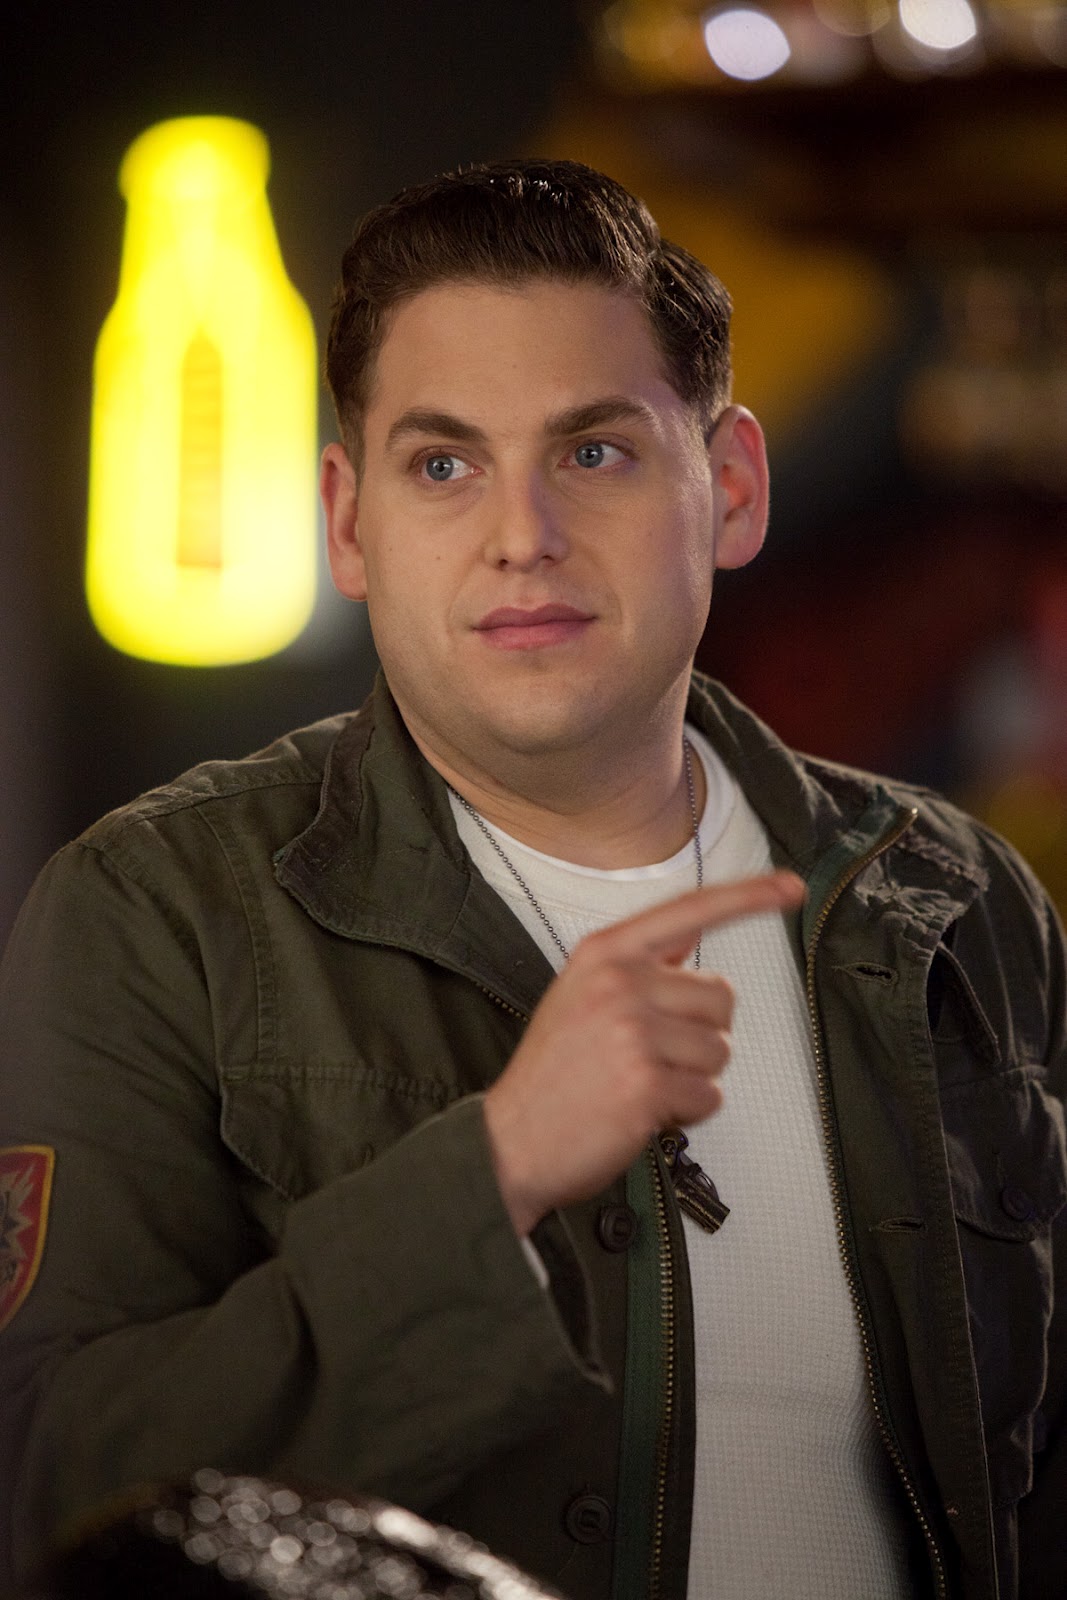 Manila Life JUMPSTREET’S JONAH HILL IN ANOTHER OUTRAGEOUS COMEDY